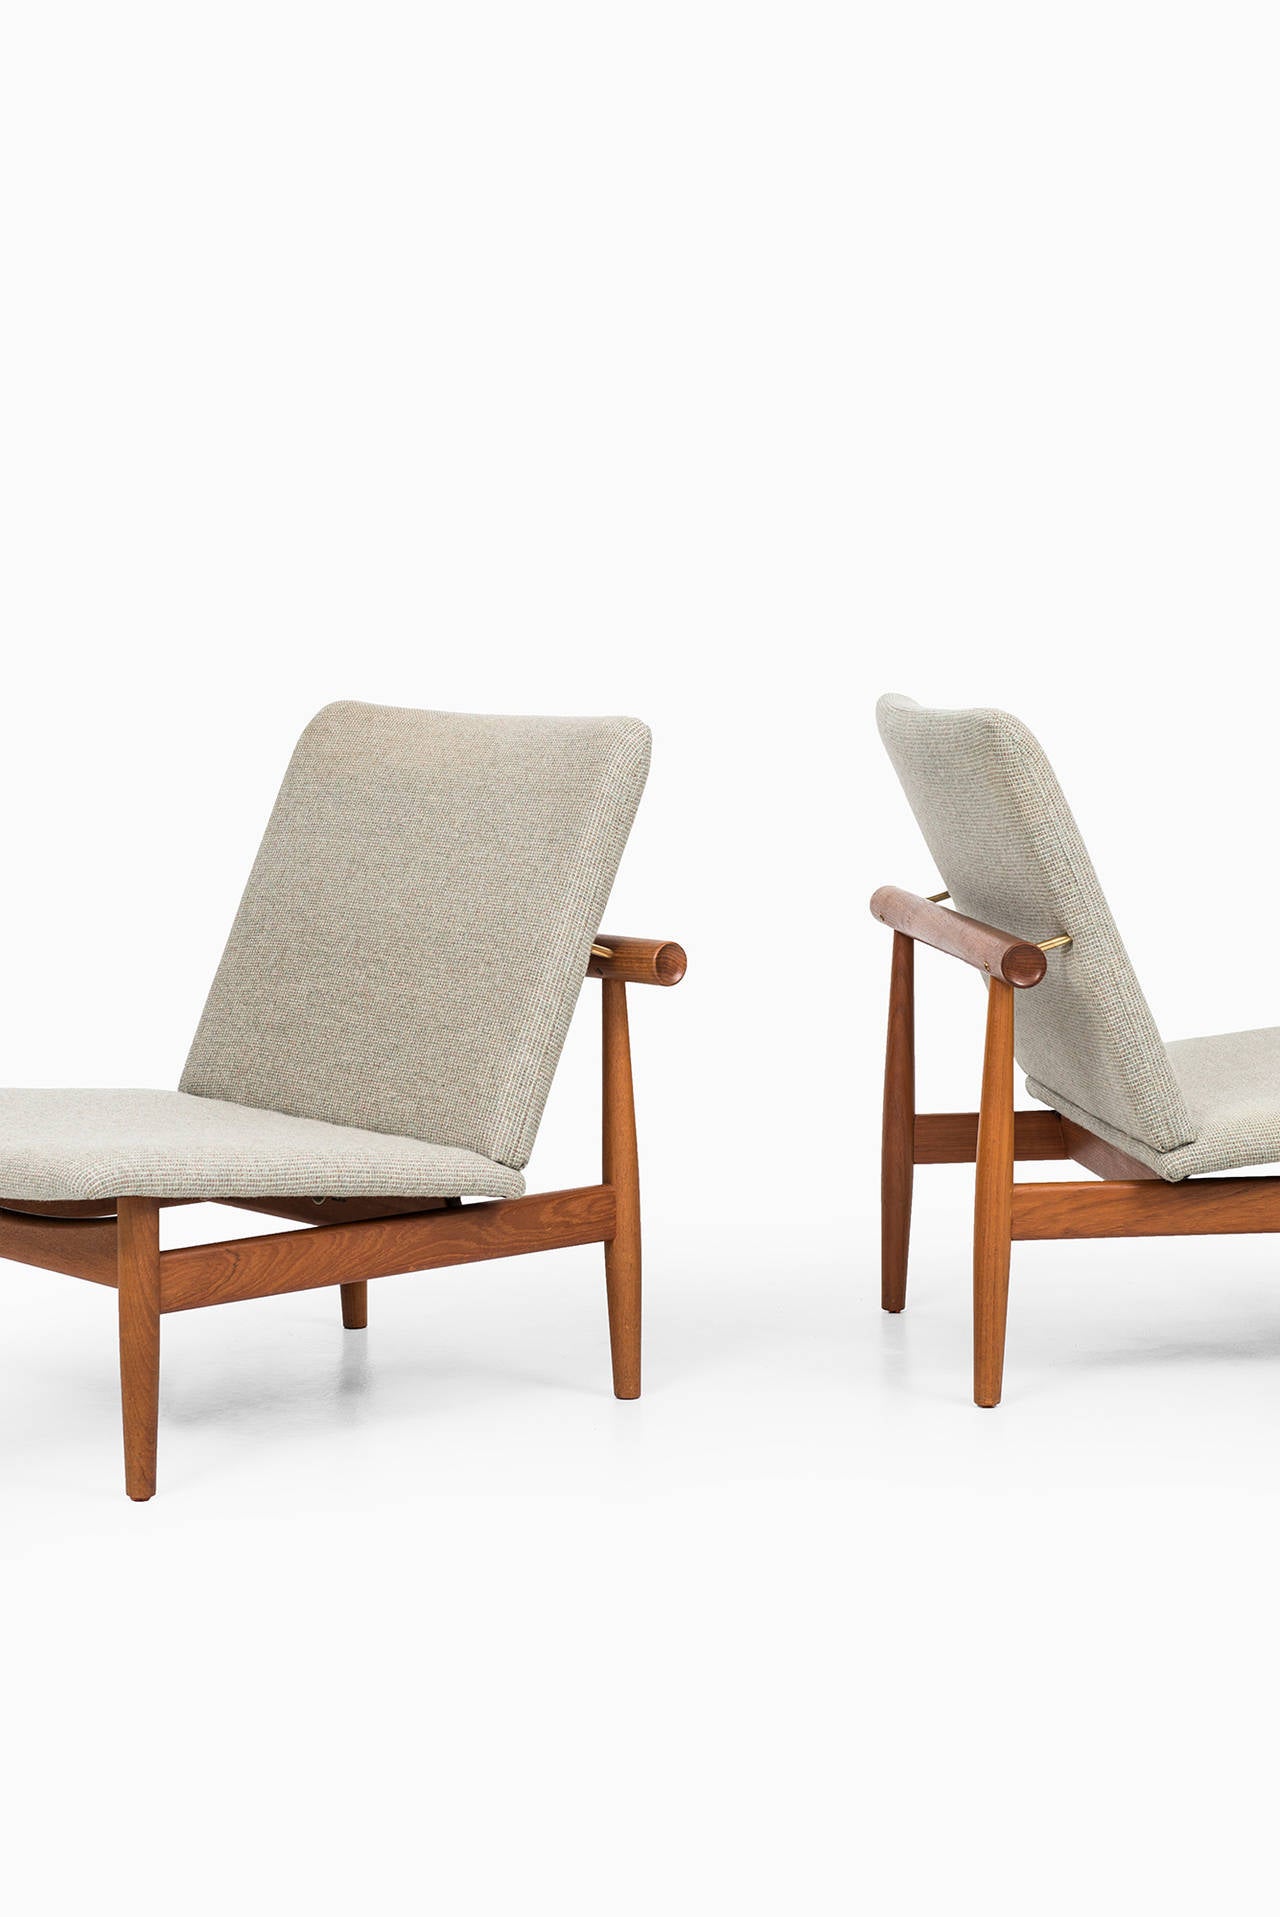 A pair of easy chairs model Japan / FD-137 designed by Finn Juhl. Produced by France & Son in Denmark.